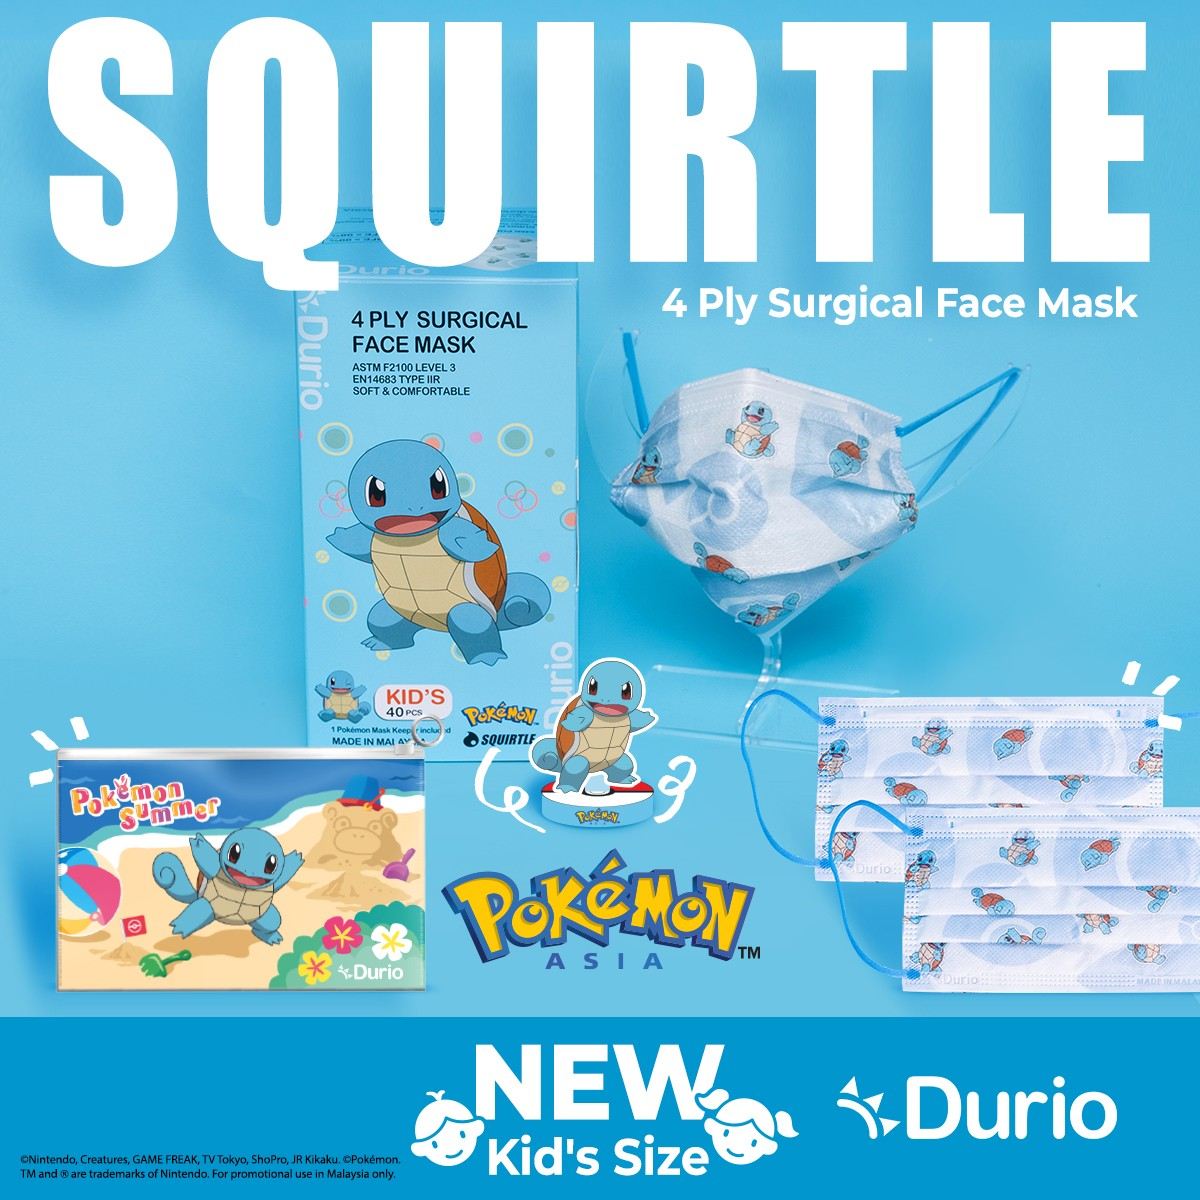 Durio 546K Pokemon Kids 4 Ply Surgical Face Mask 40s Squirtle - DoctorOnCall Online Pharmacy